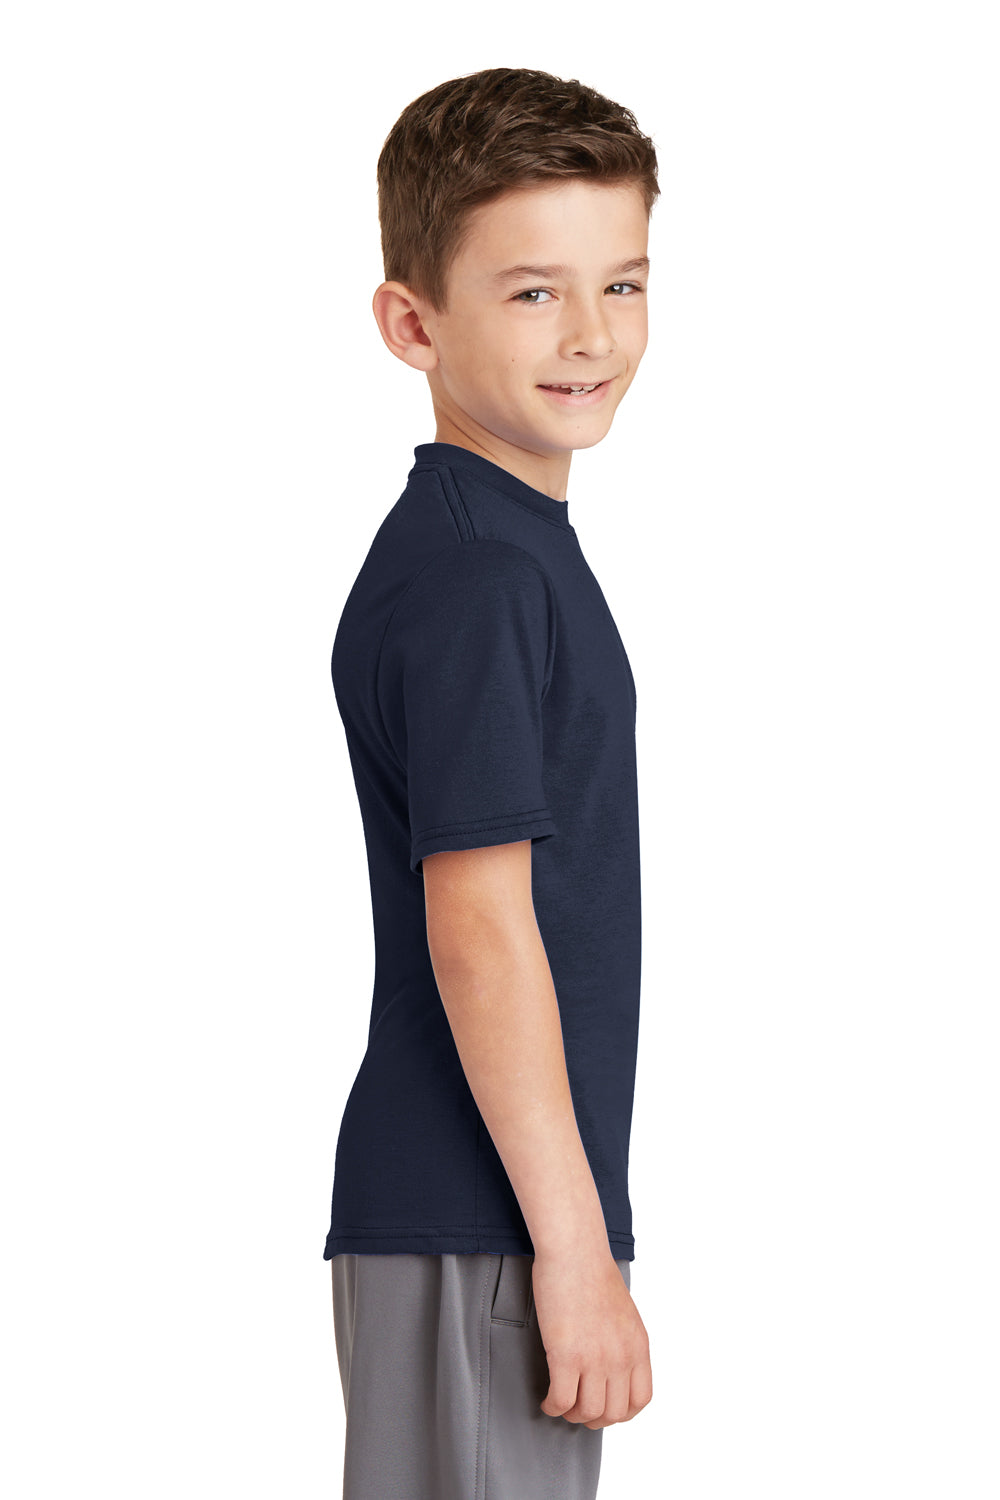 Port & Company PC381Y Youth Dry Zone Performance Moisture Wicking Short Sleeve Crewneck T-Shirt Navy Blue Side